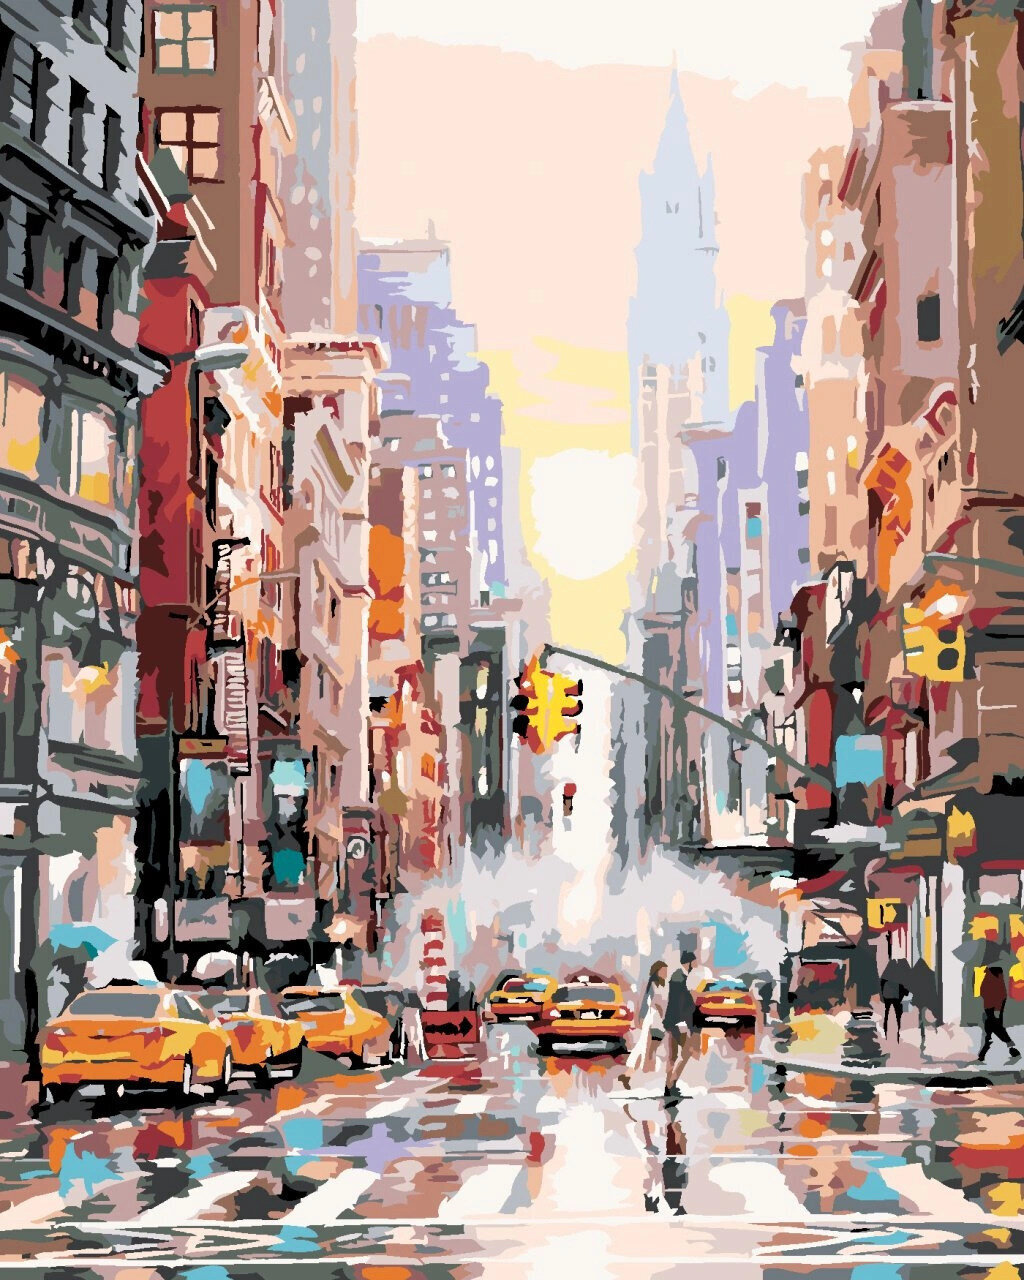 Painting by Numbers Zuty Painting by Numbers New York Street And Yellow Cabs (Richard Macneil)